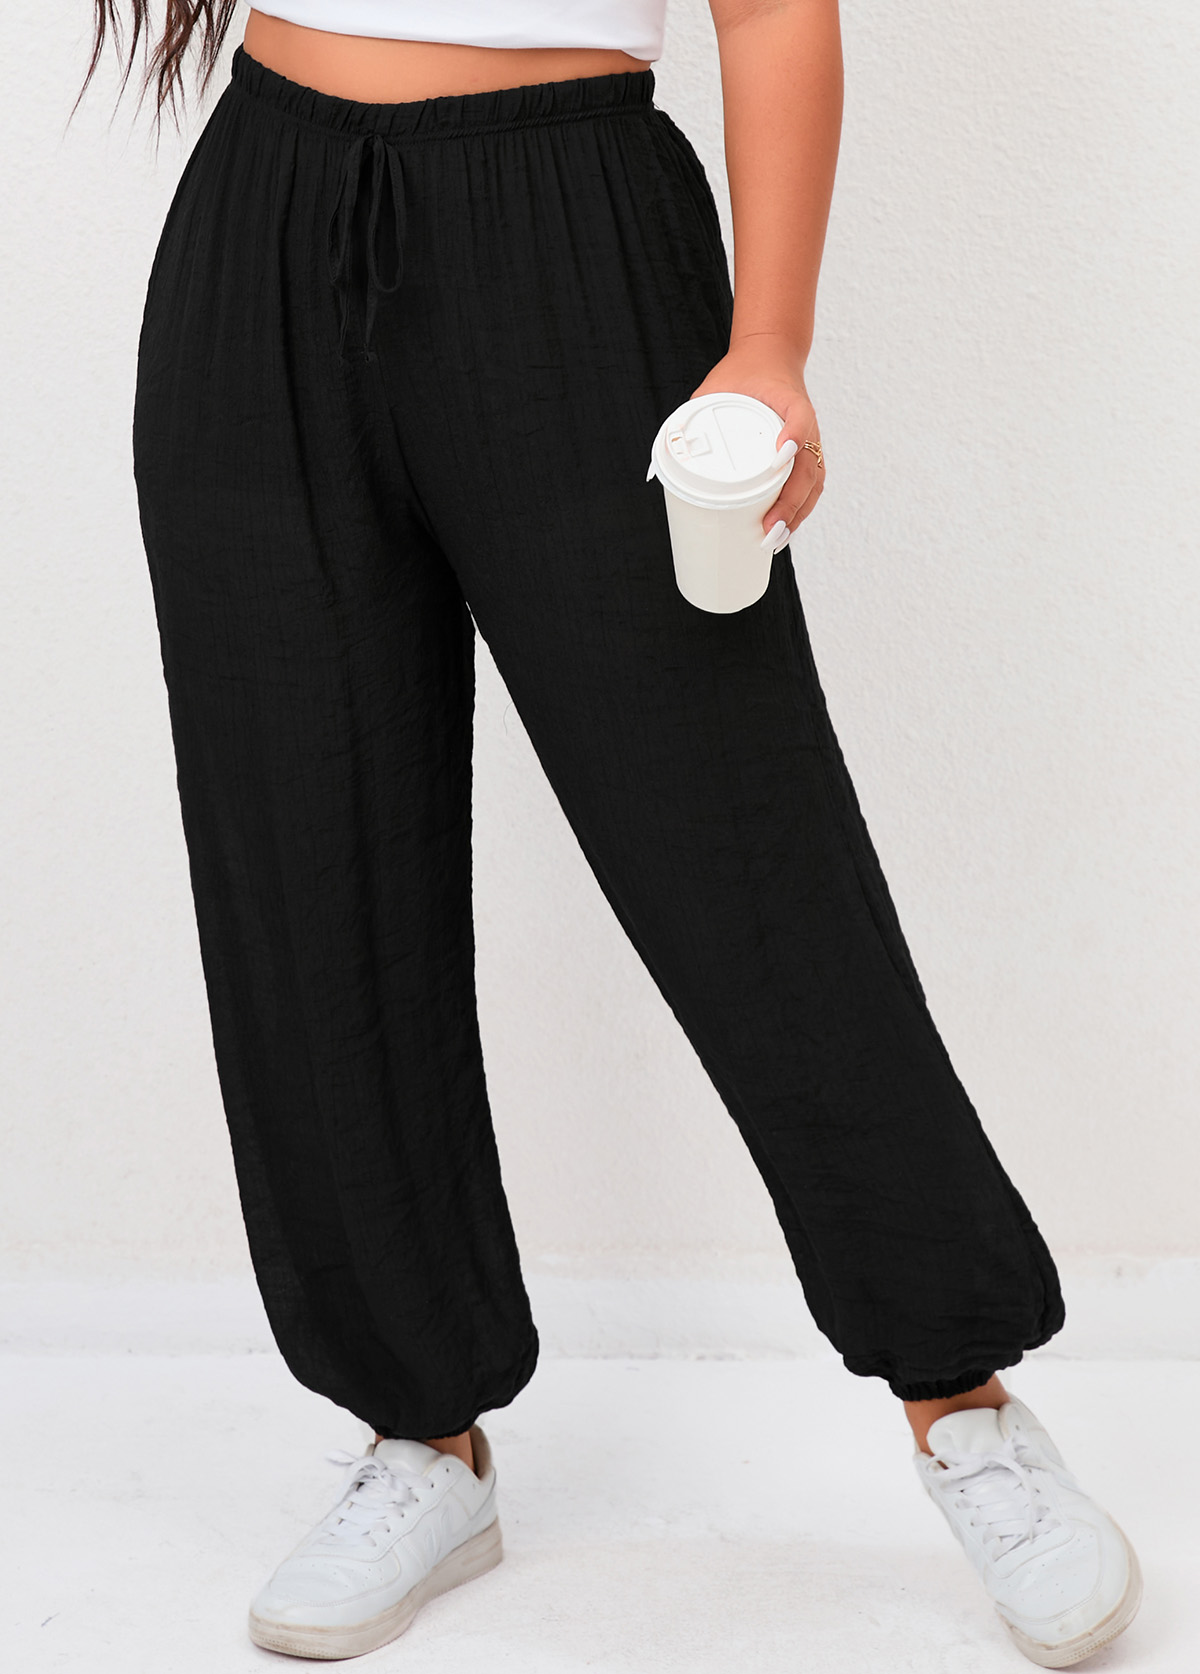 Tie Front Plus Size Black High Waisted Pants